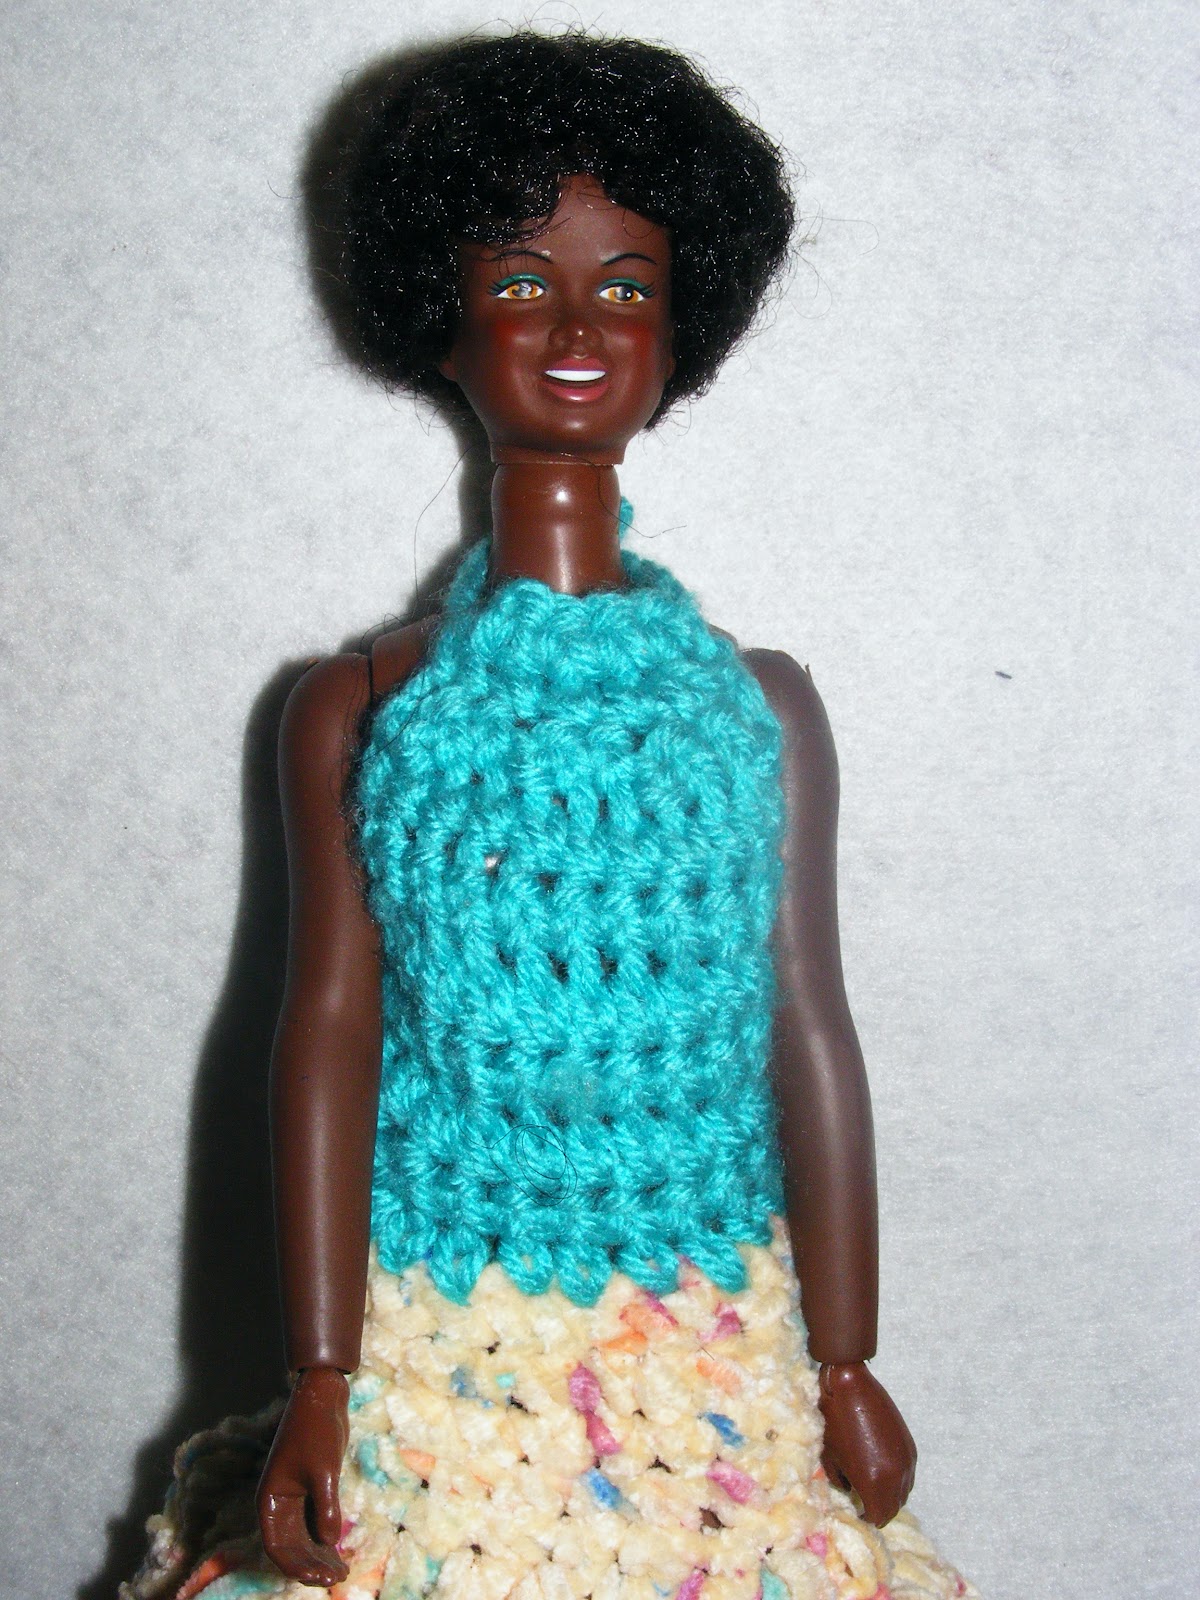 World of Black Male Dolls and Action Figures : March 2012